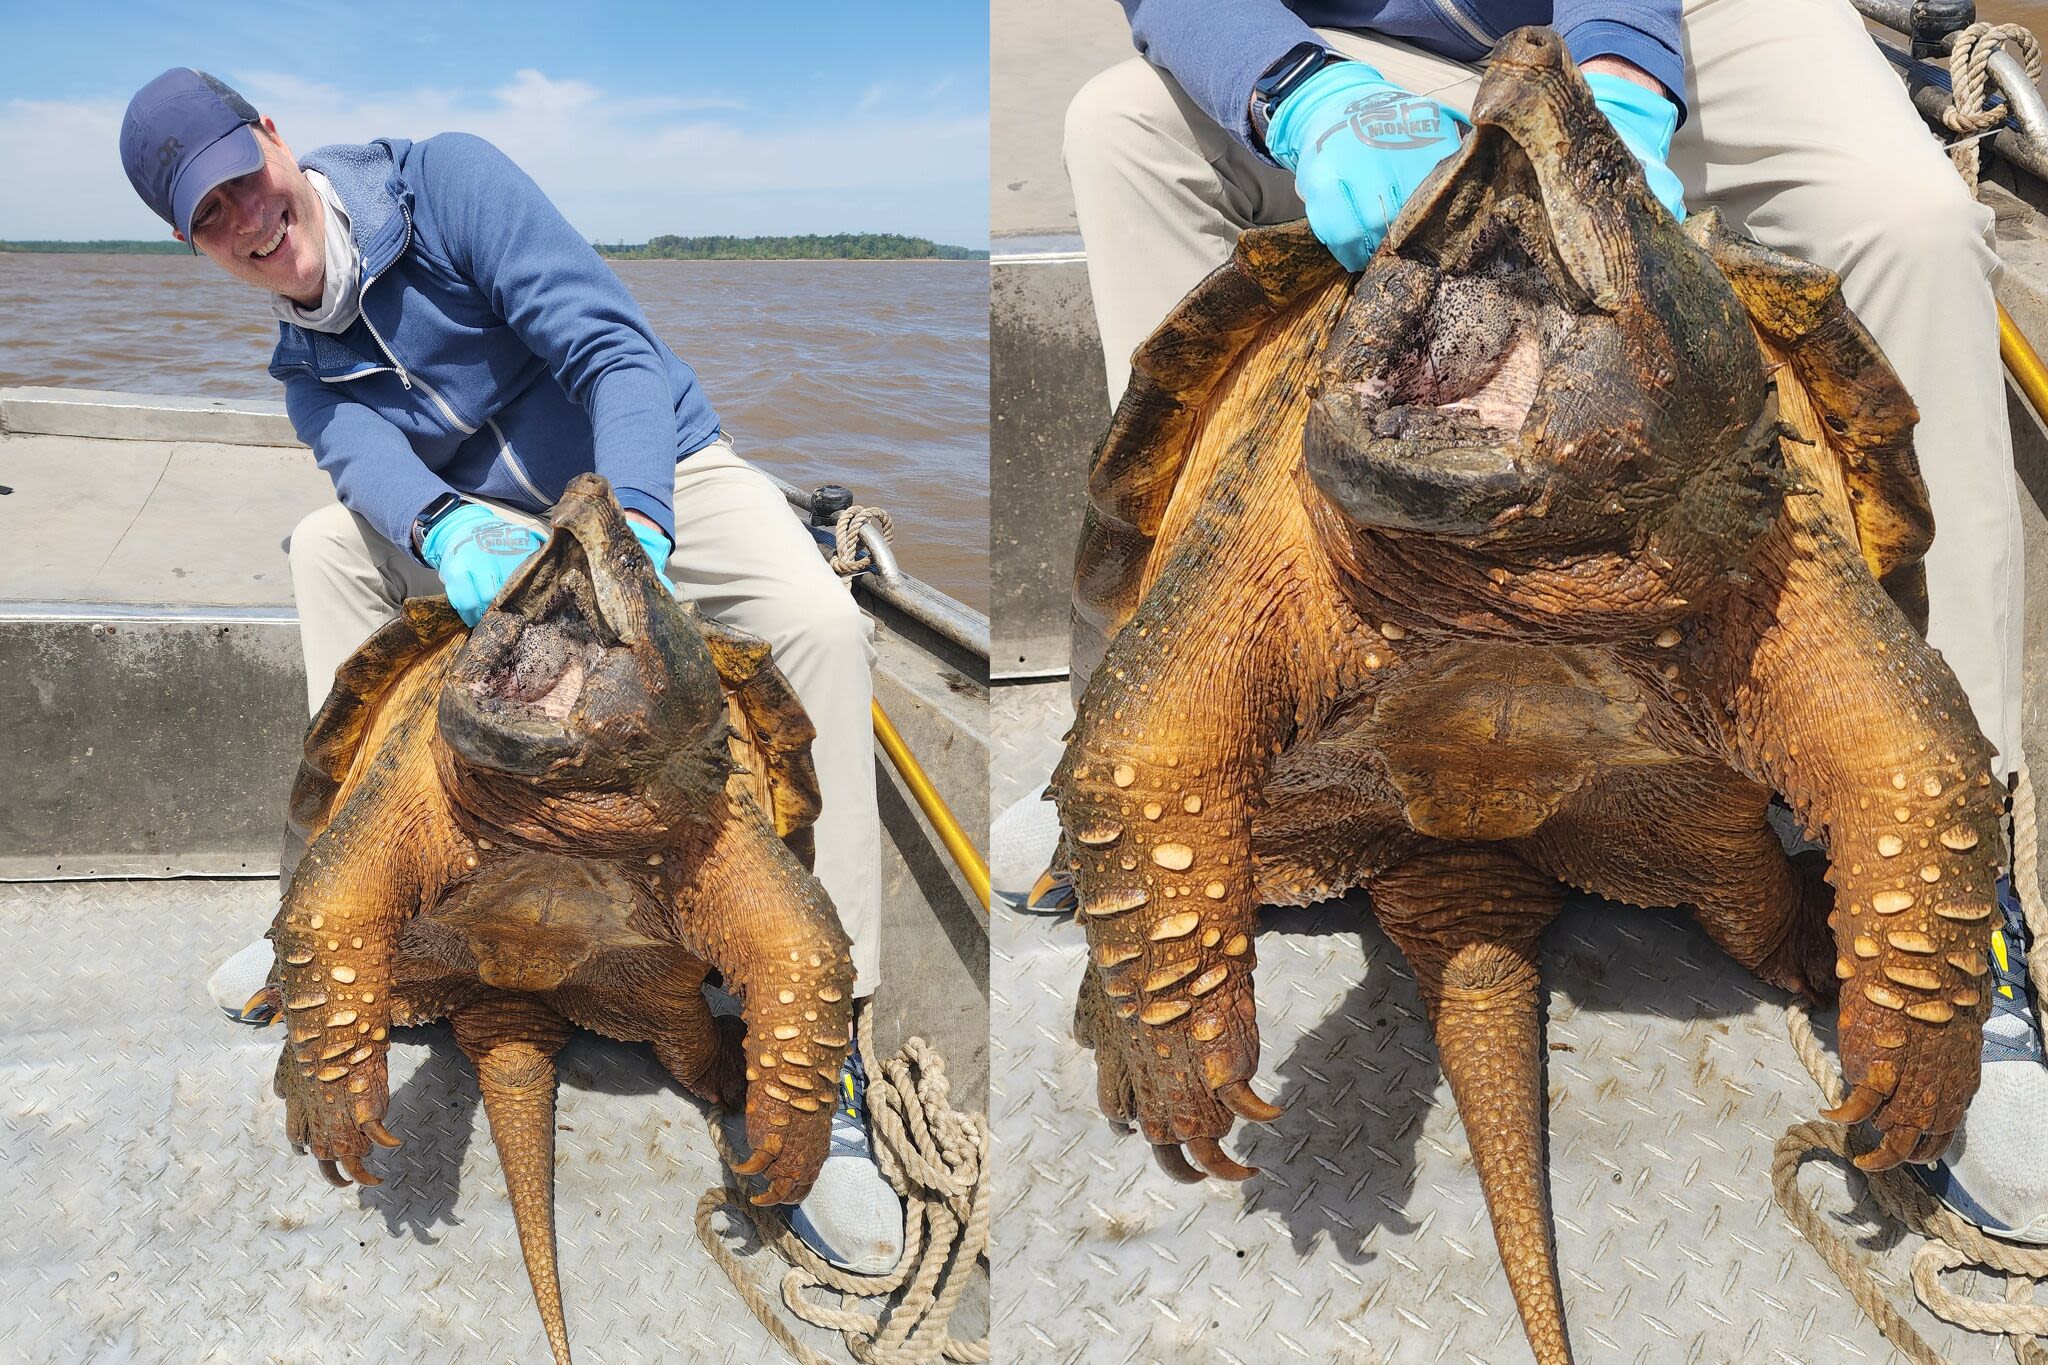 Man accidentally catches 200-plus-pound snapping turtle in Texas